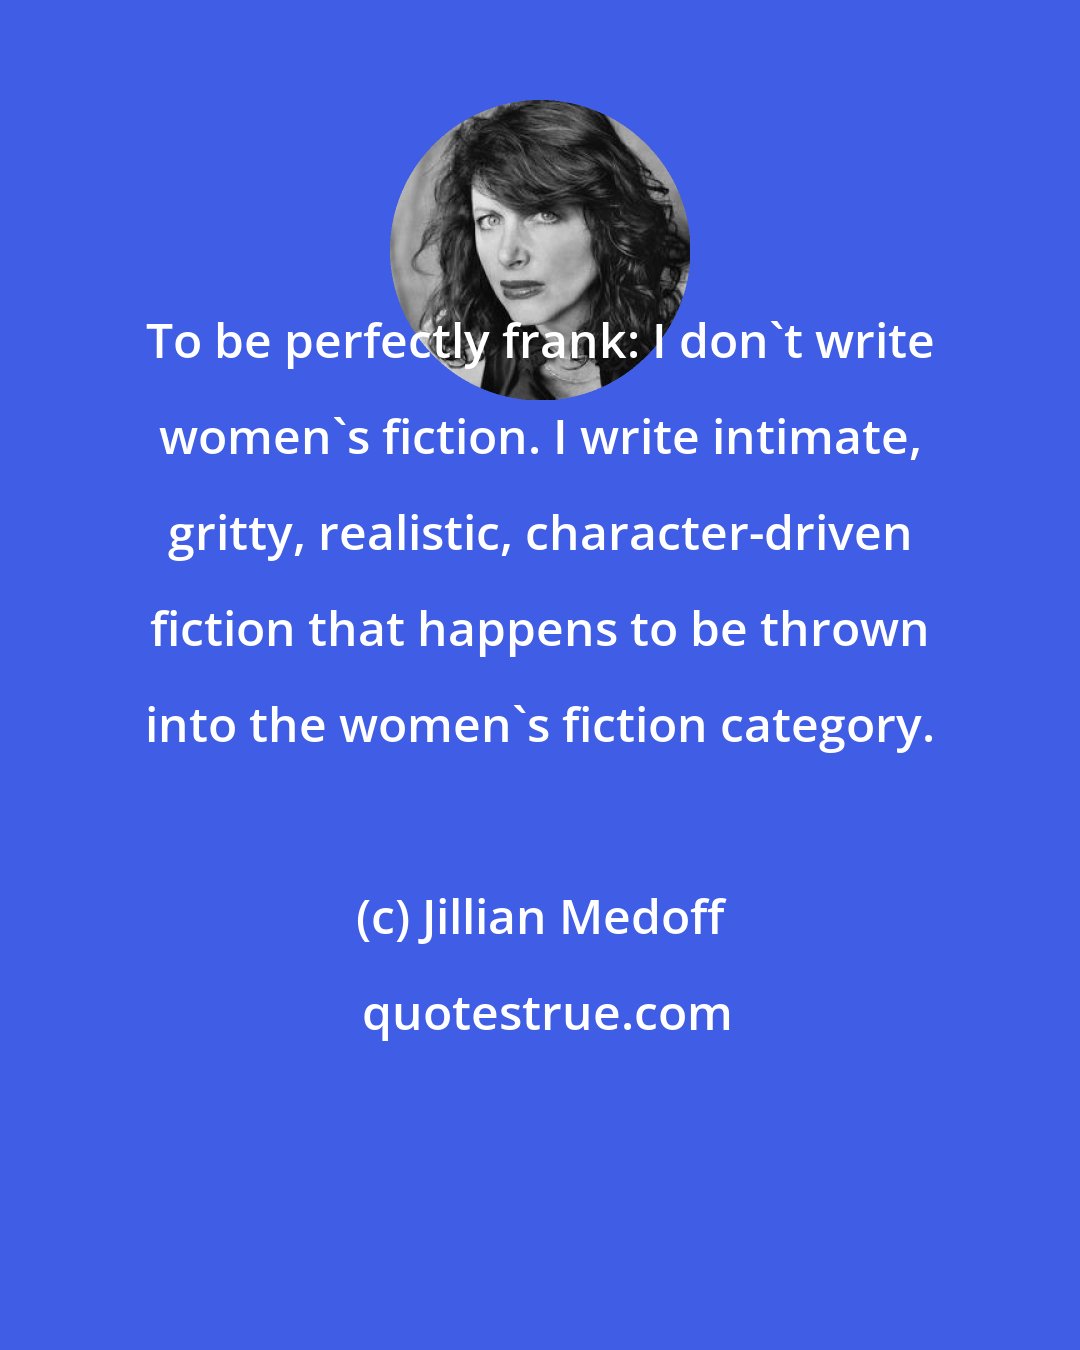 Jillian Medoff: To be perfectly frank: I don't write women's fiction. I write intimate, gritty, realistic, character-driven fiction that happens to be thrown into the women's fiction category.